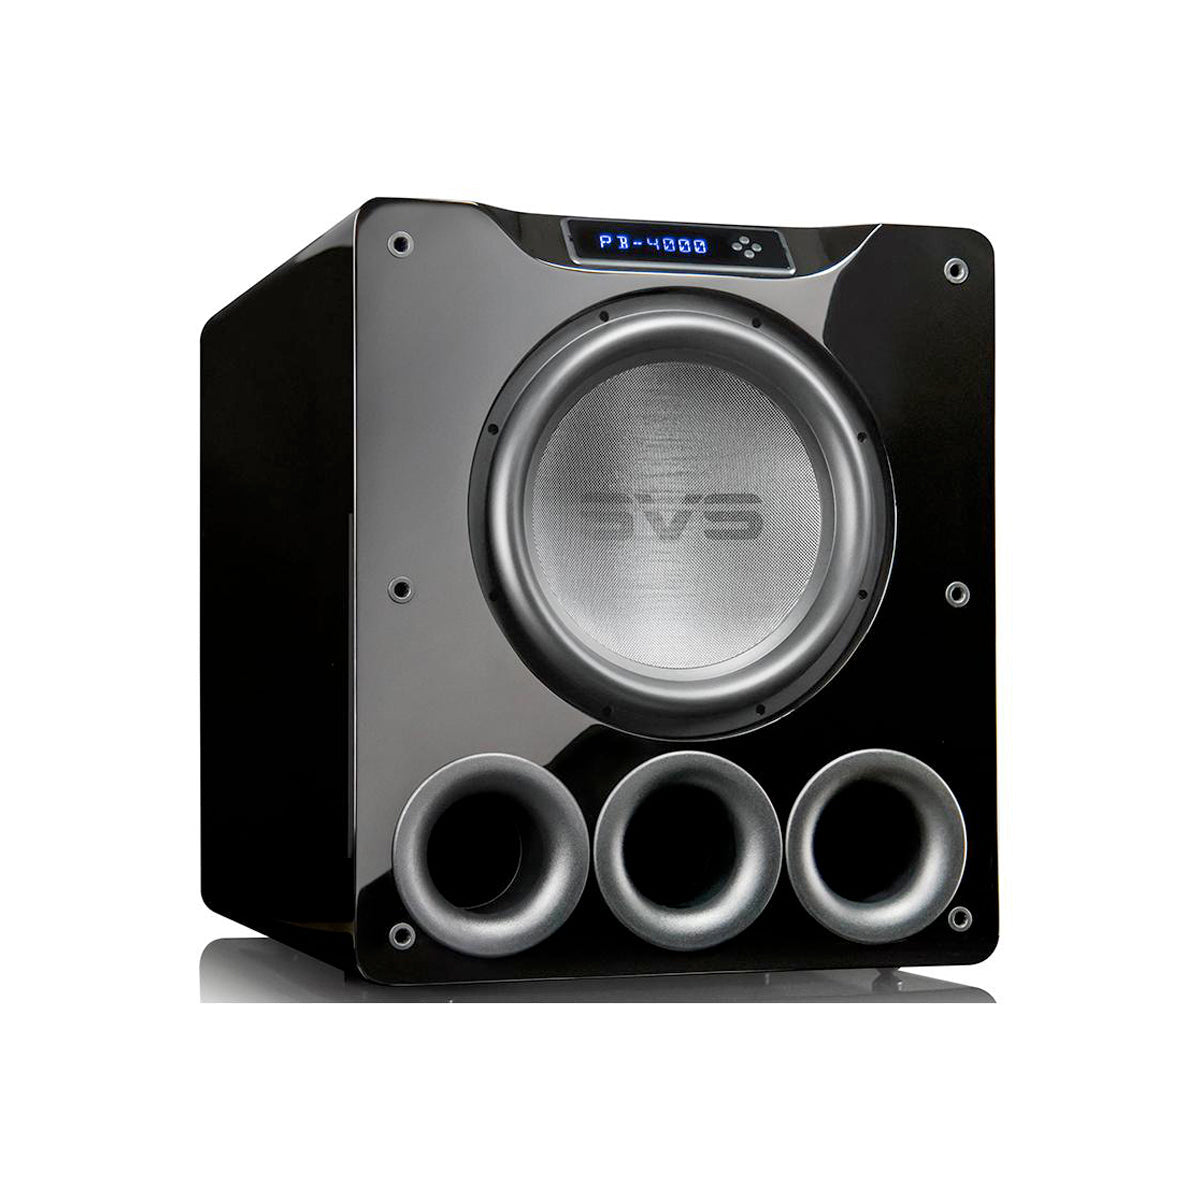 SVS PB-4000 13.5" Ported Subwoofer - The Audio Experts